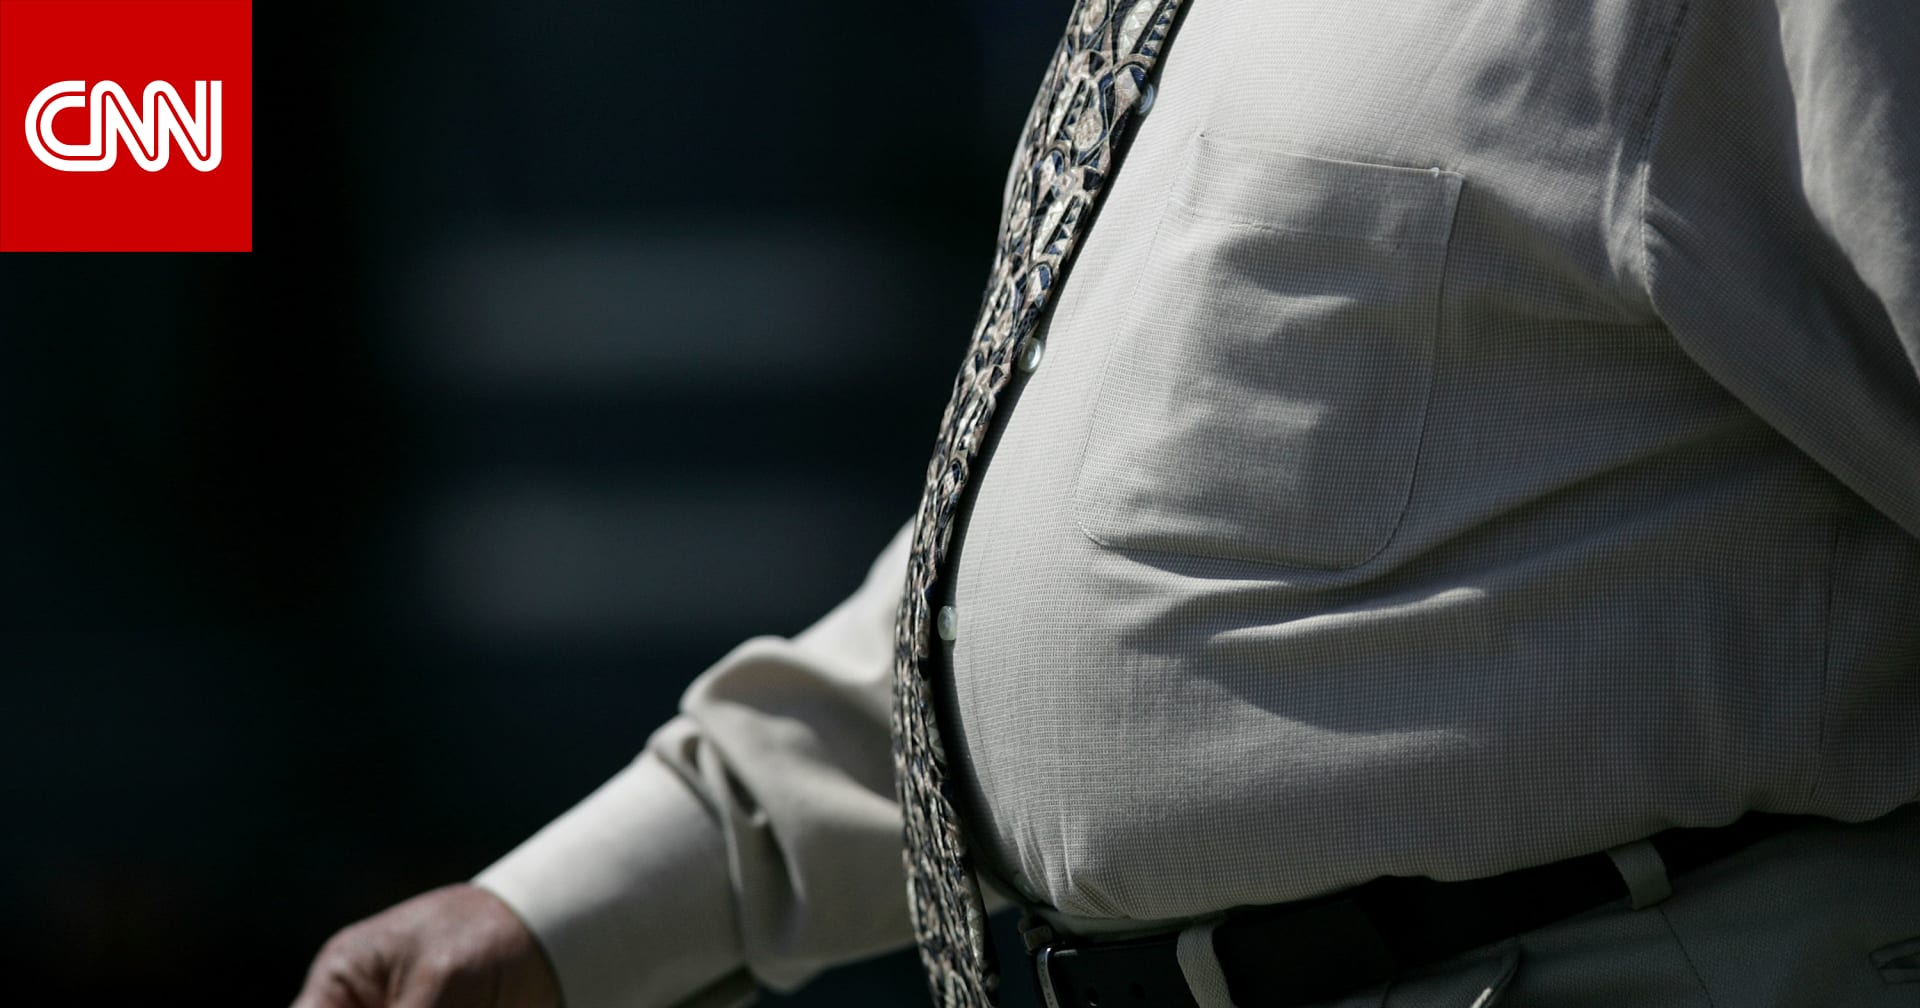 Study: Being overweight is not necessarily associated with premature death